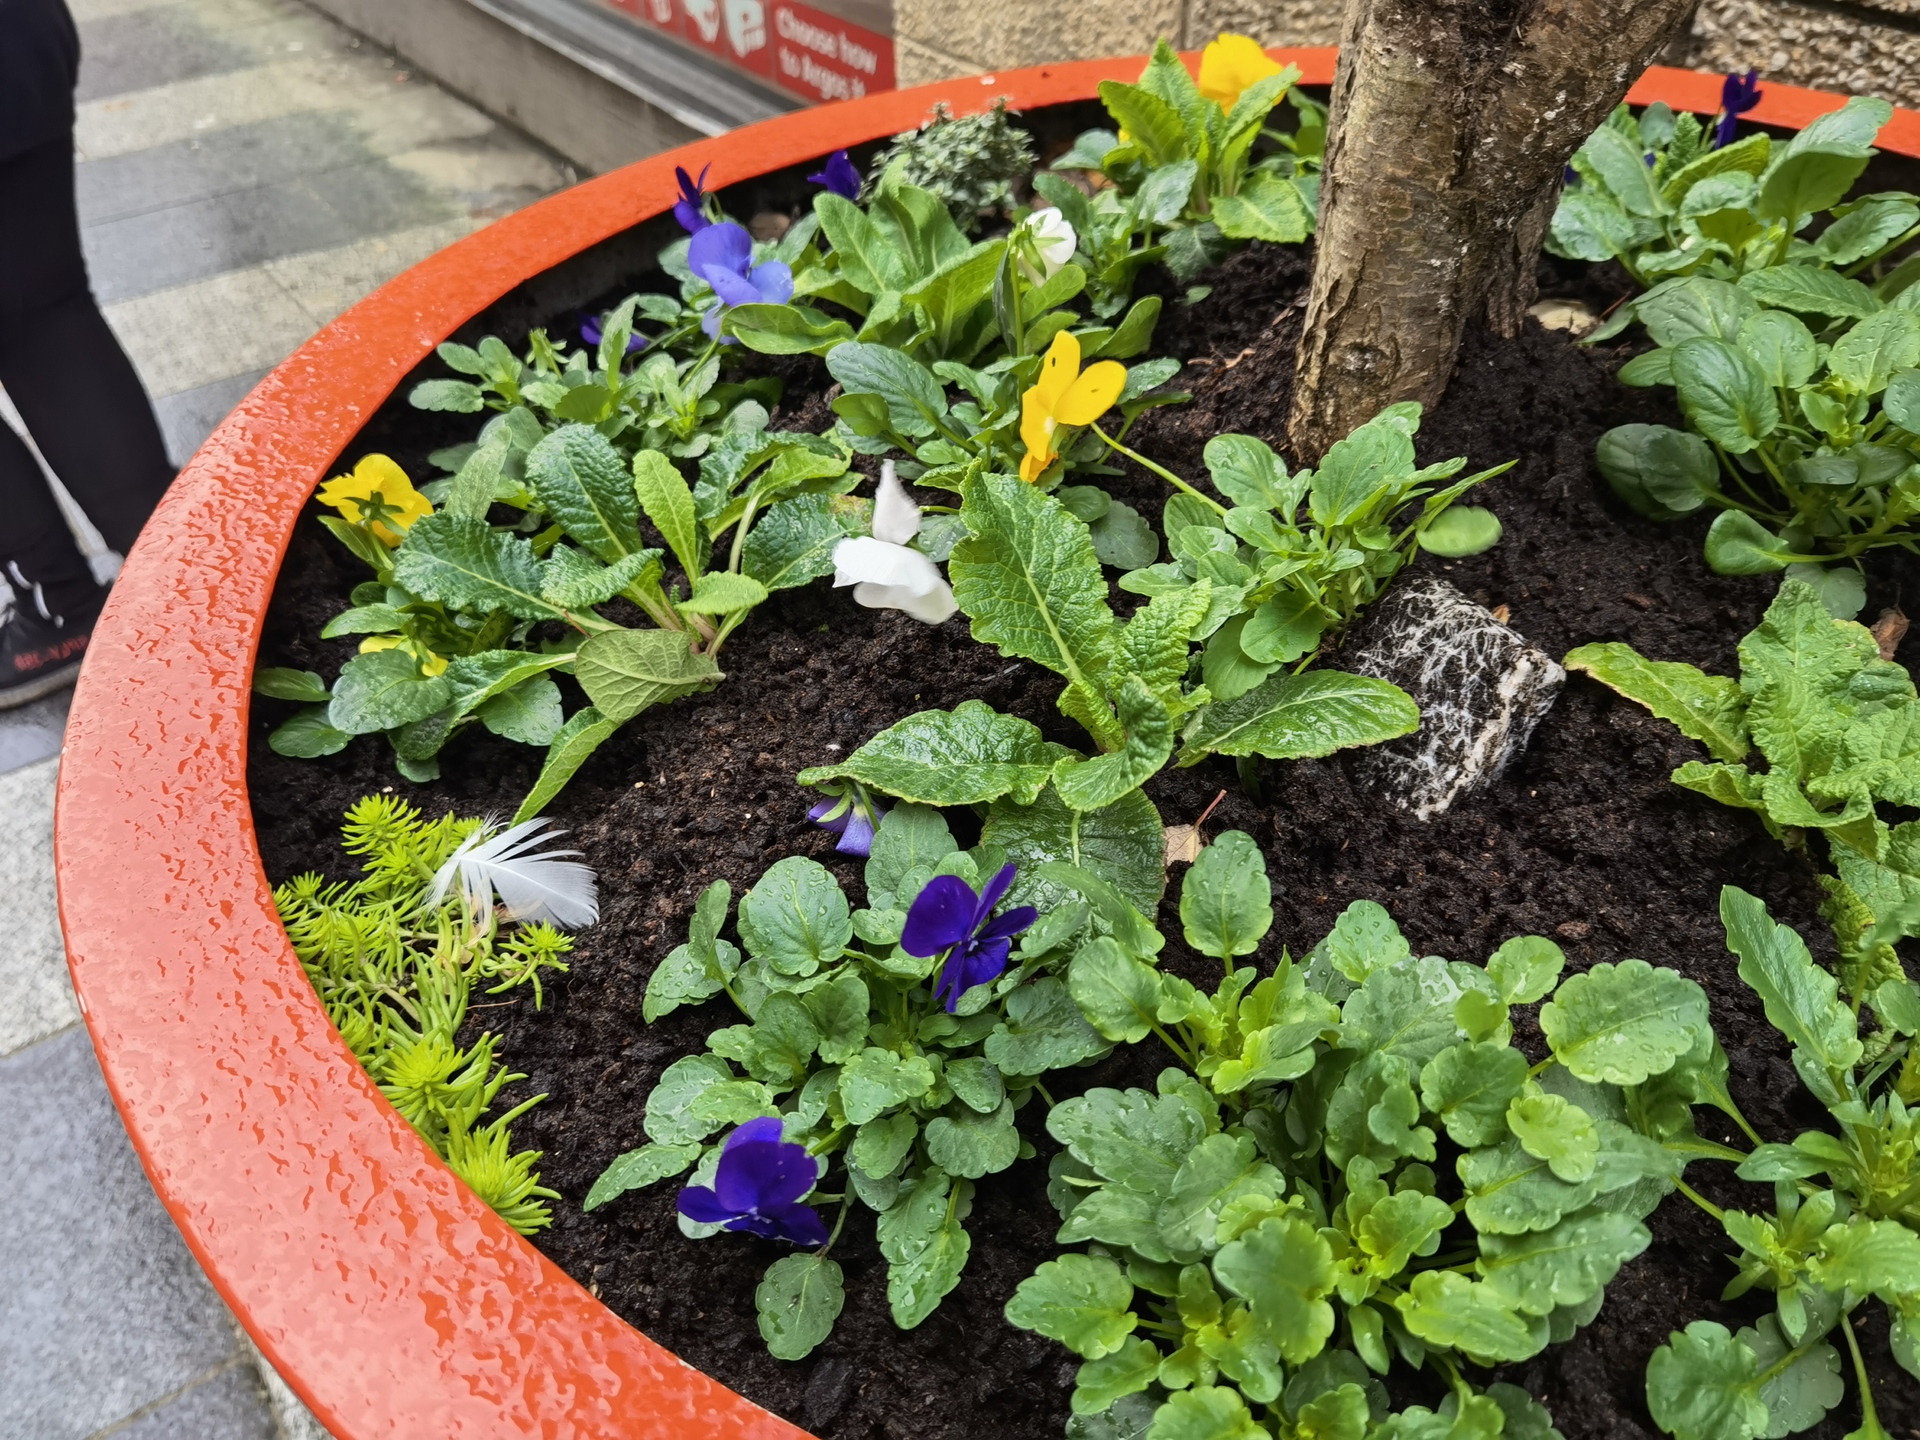 HUAWEI Mate 40 Pro sample of a plant pot